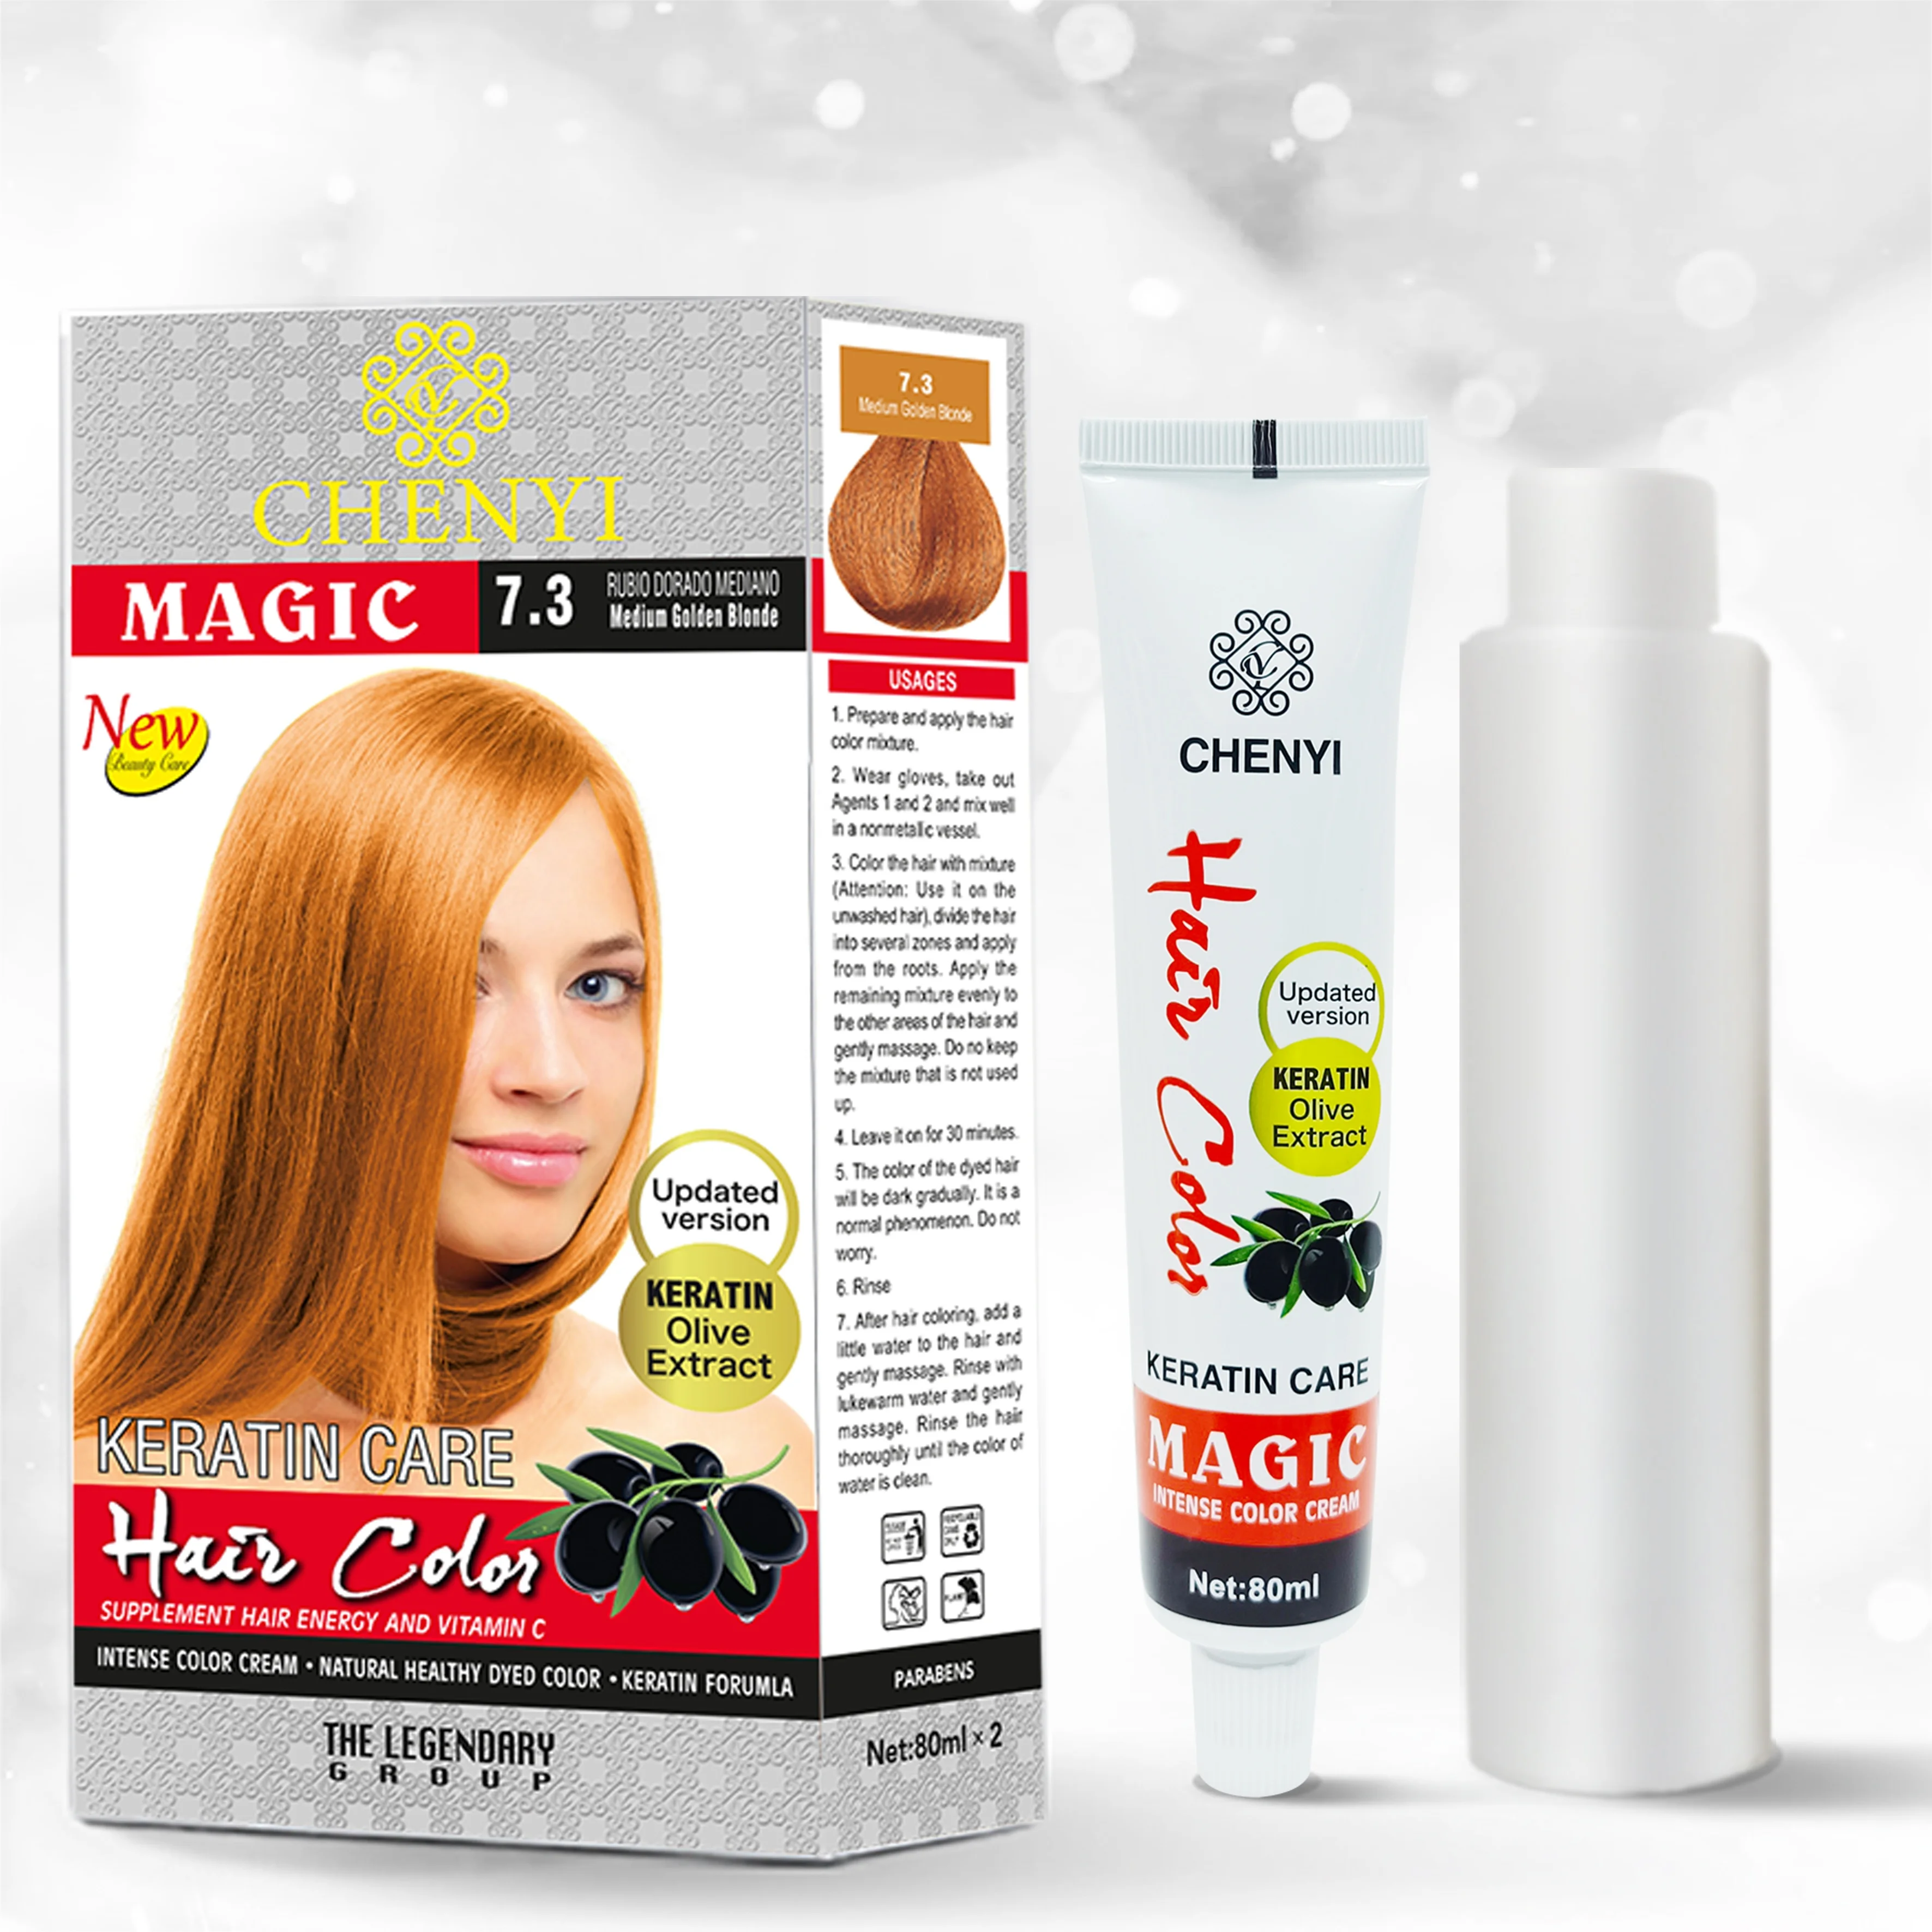 Chenyi Magic Brand Safe Formula Permanent Hair Dye With Factory Wholesale  Price - Buy Hair Dye,Permanent Black Hair Dye,Natural Hair Dye Product on  